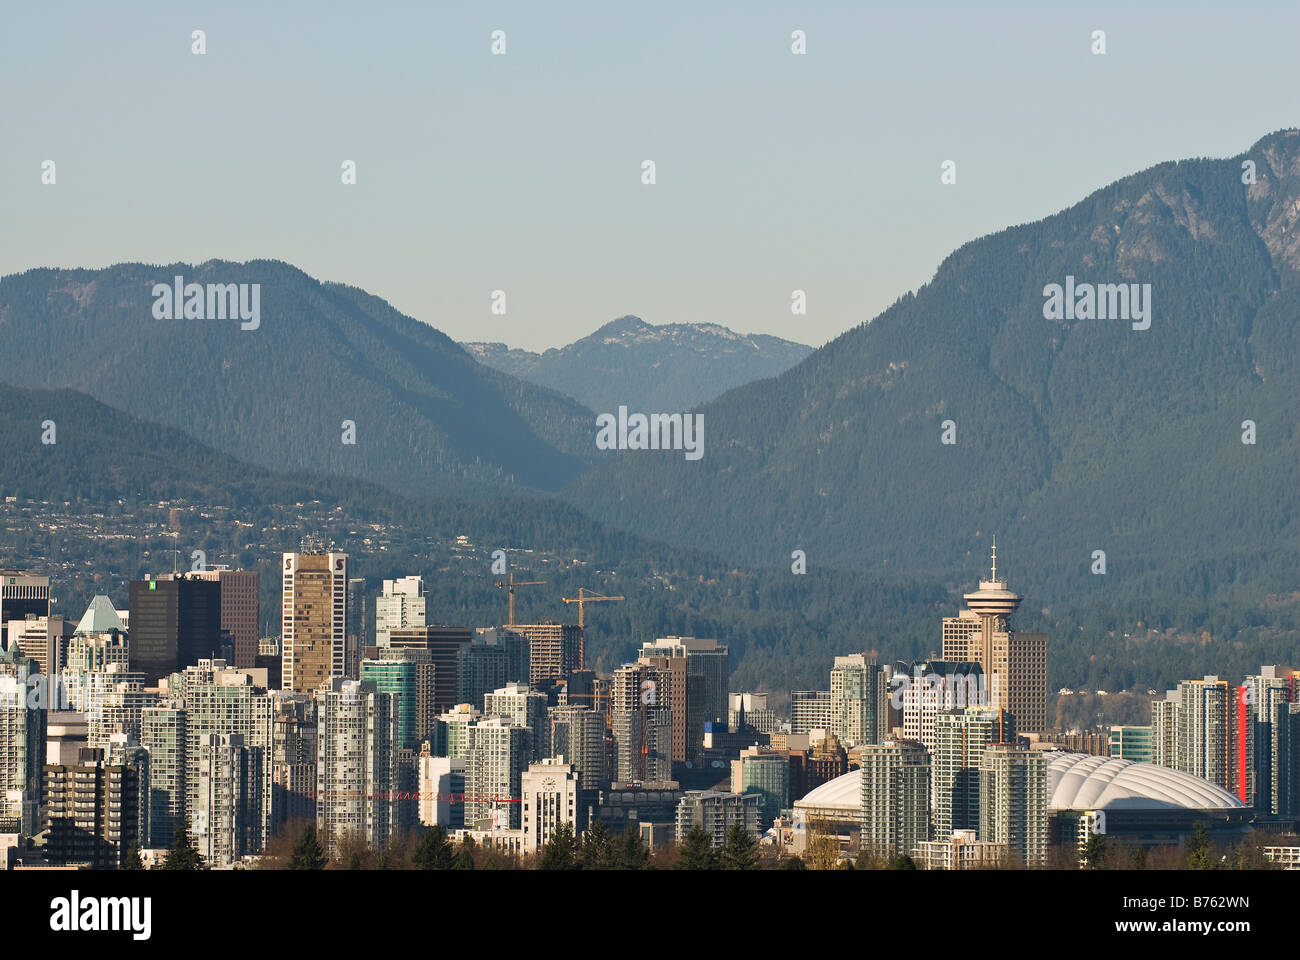 A view of the ever changing skyline of the downtown area of Vancouver set against the mountains on the north shore. Stock Photo